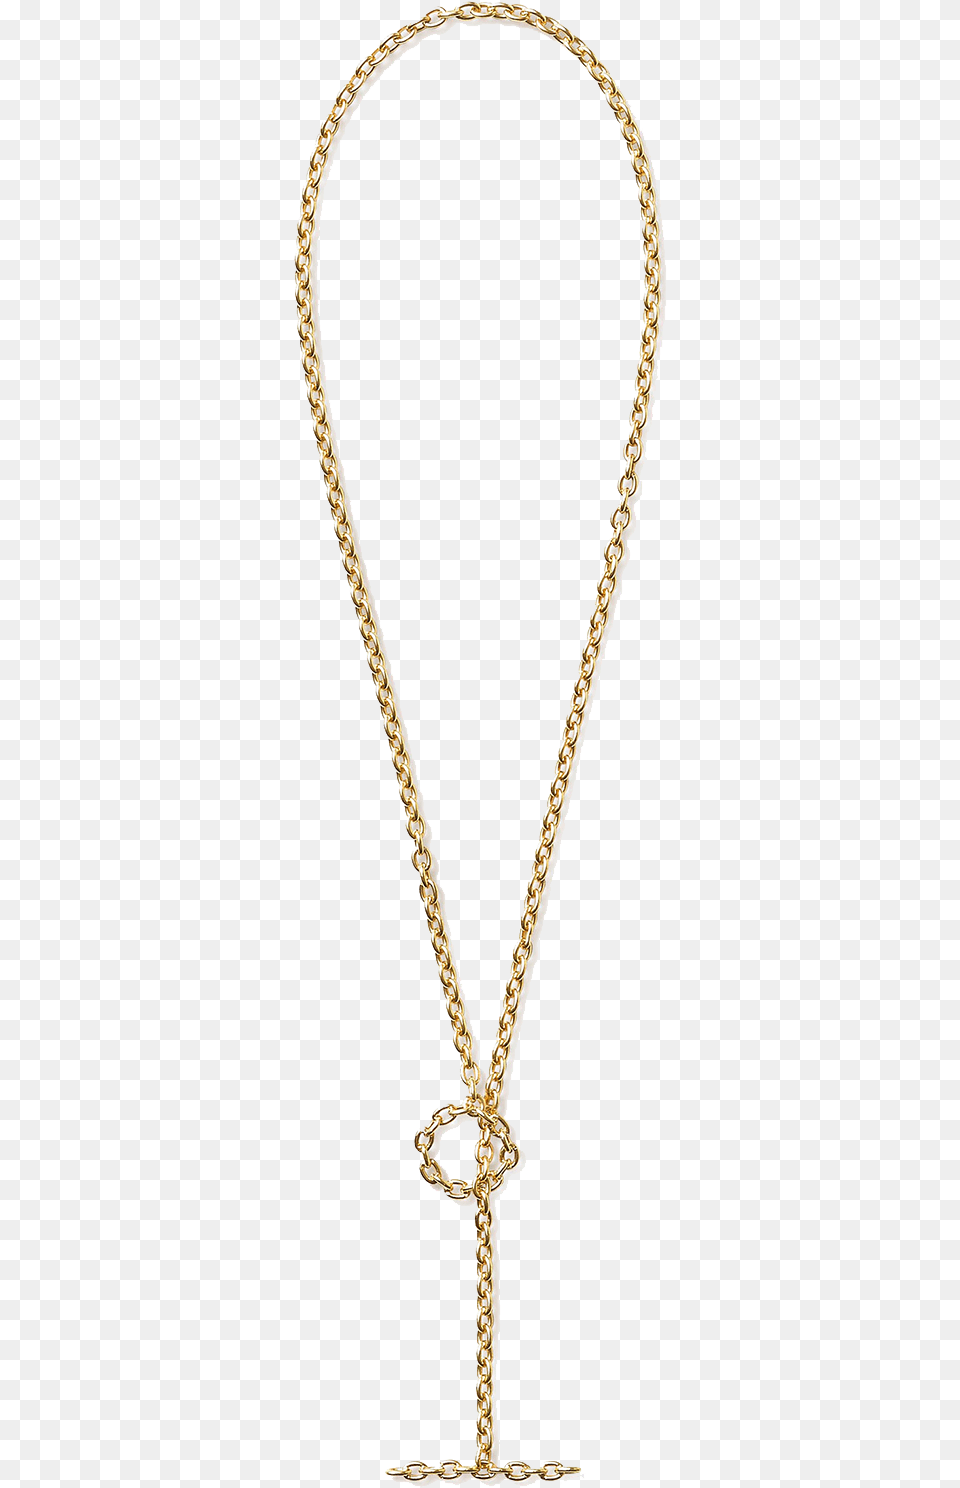 Chain, Accessories, Jewelry, Necklace, Diamond Png Image